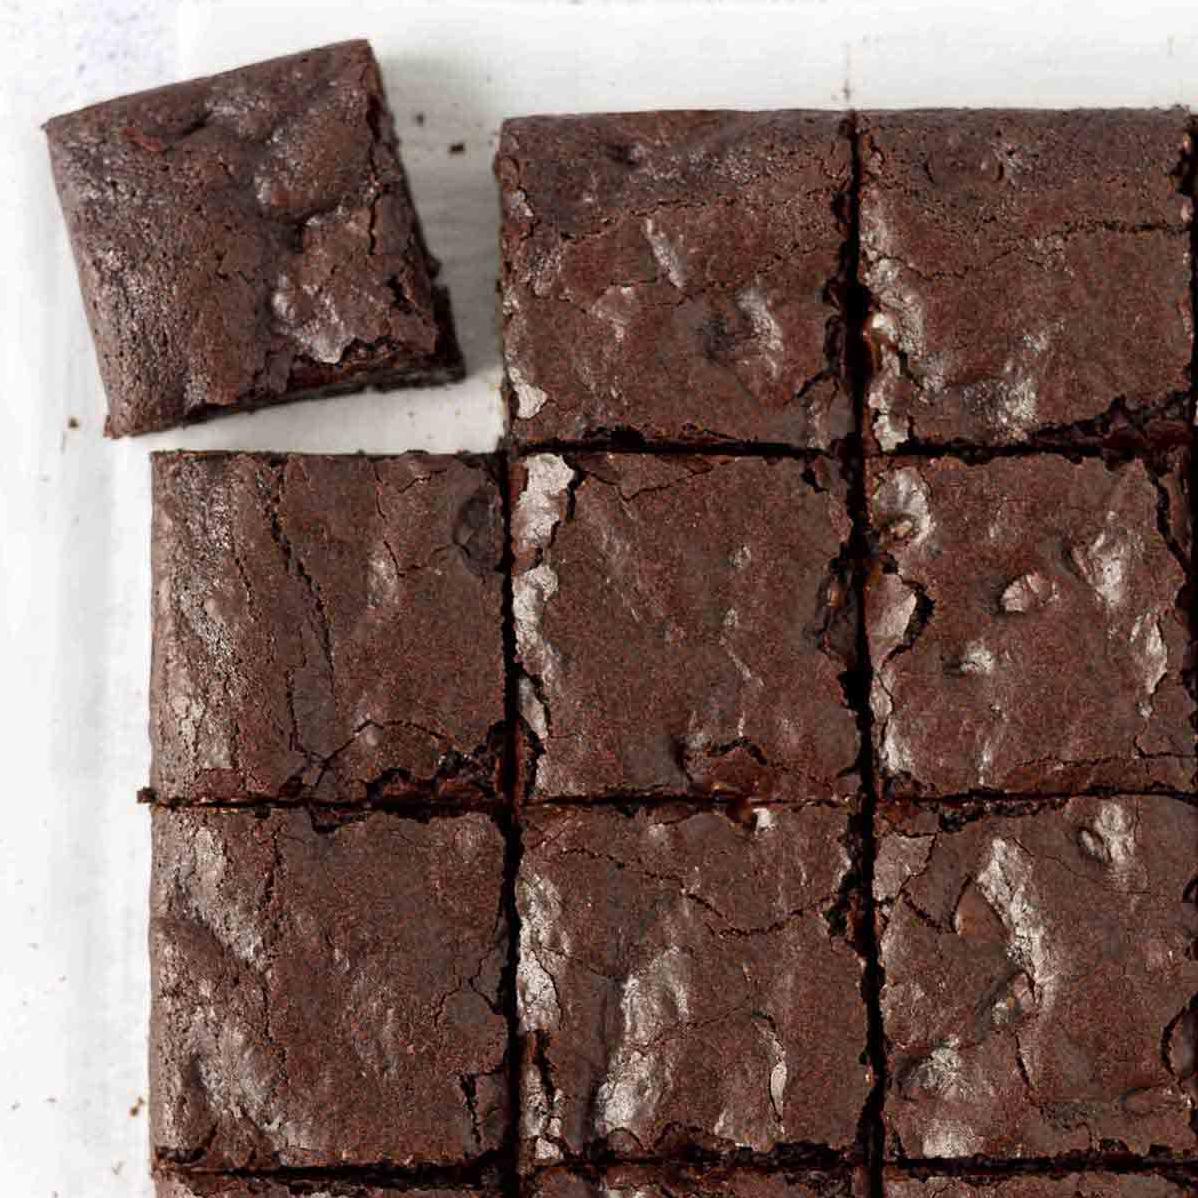  A fudgy, chocolatey treat that's completely dairy-free and gluten-free? Yes, please!